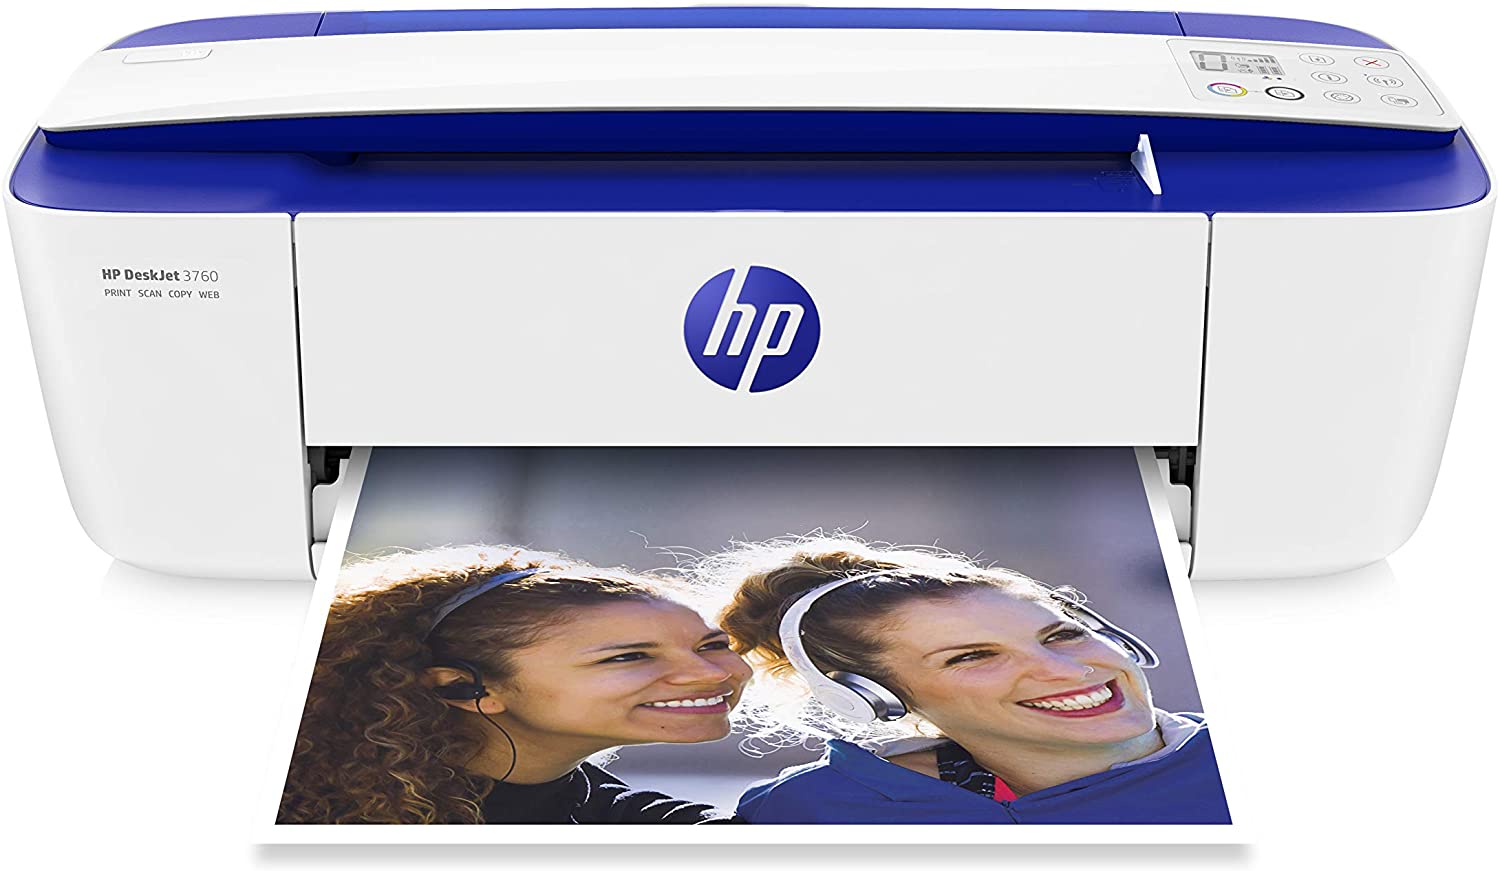  HP DeskJet 3760 All-in-One Printer, Instant Ink with 2 Months Trial uk reviews